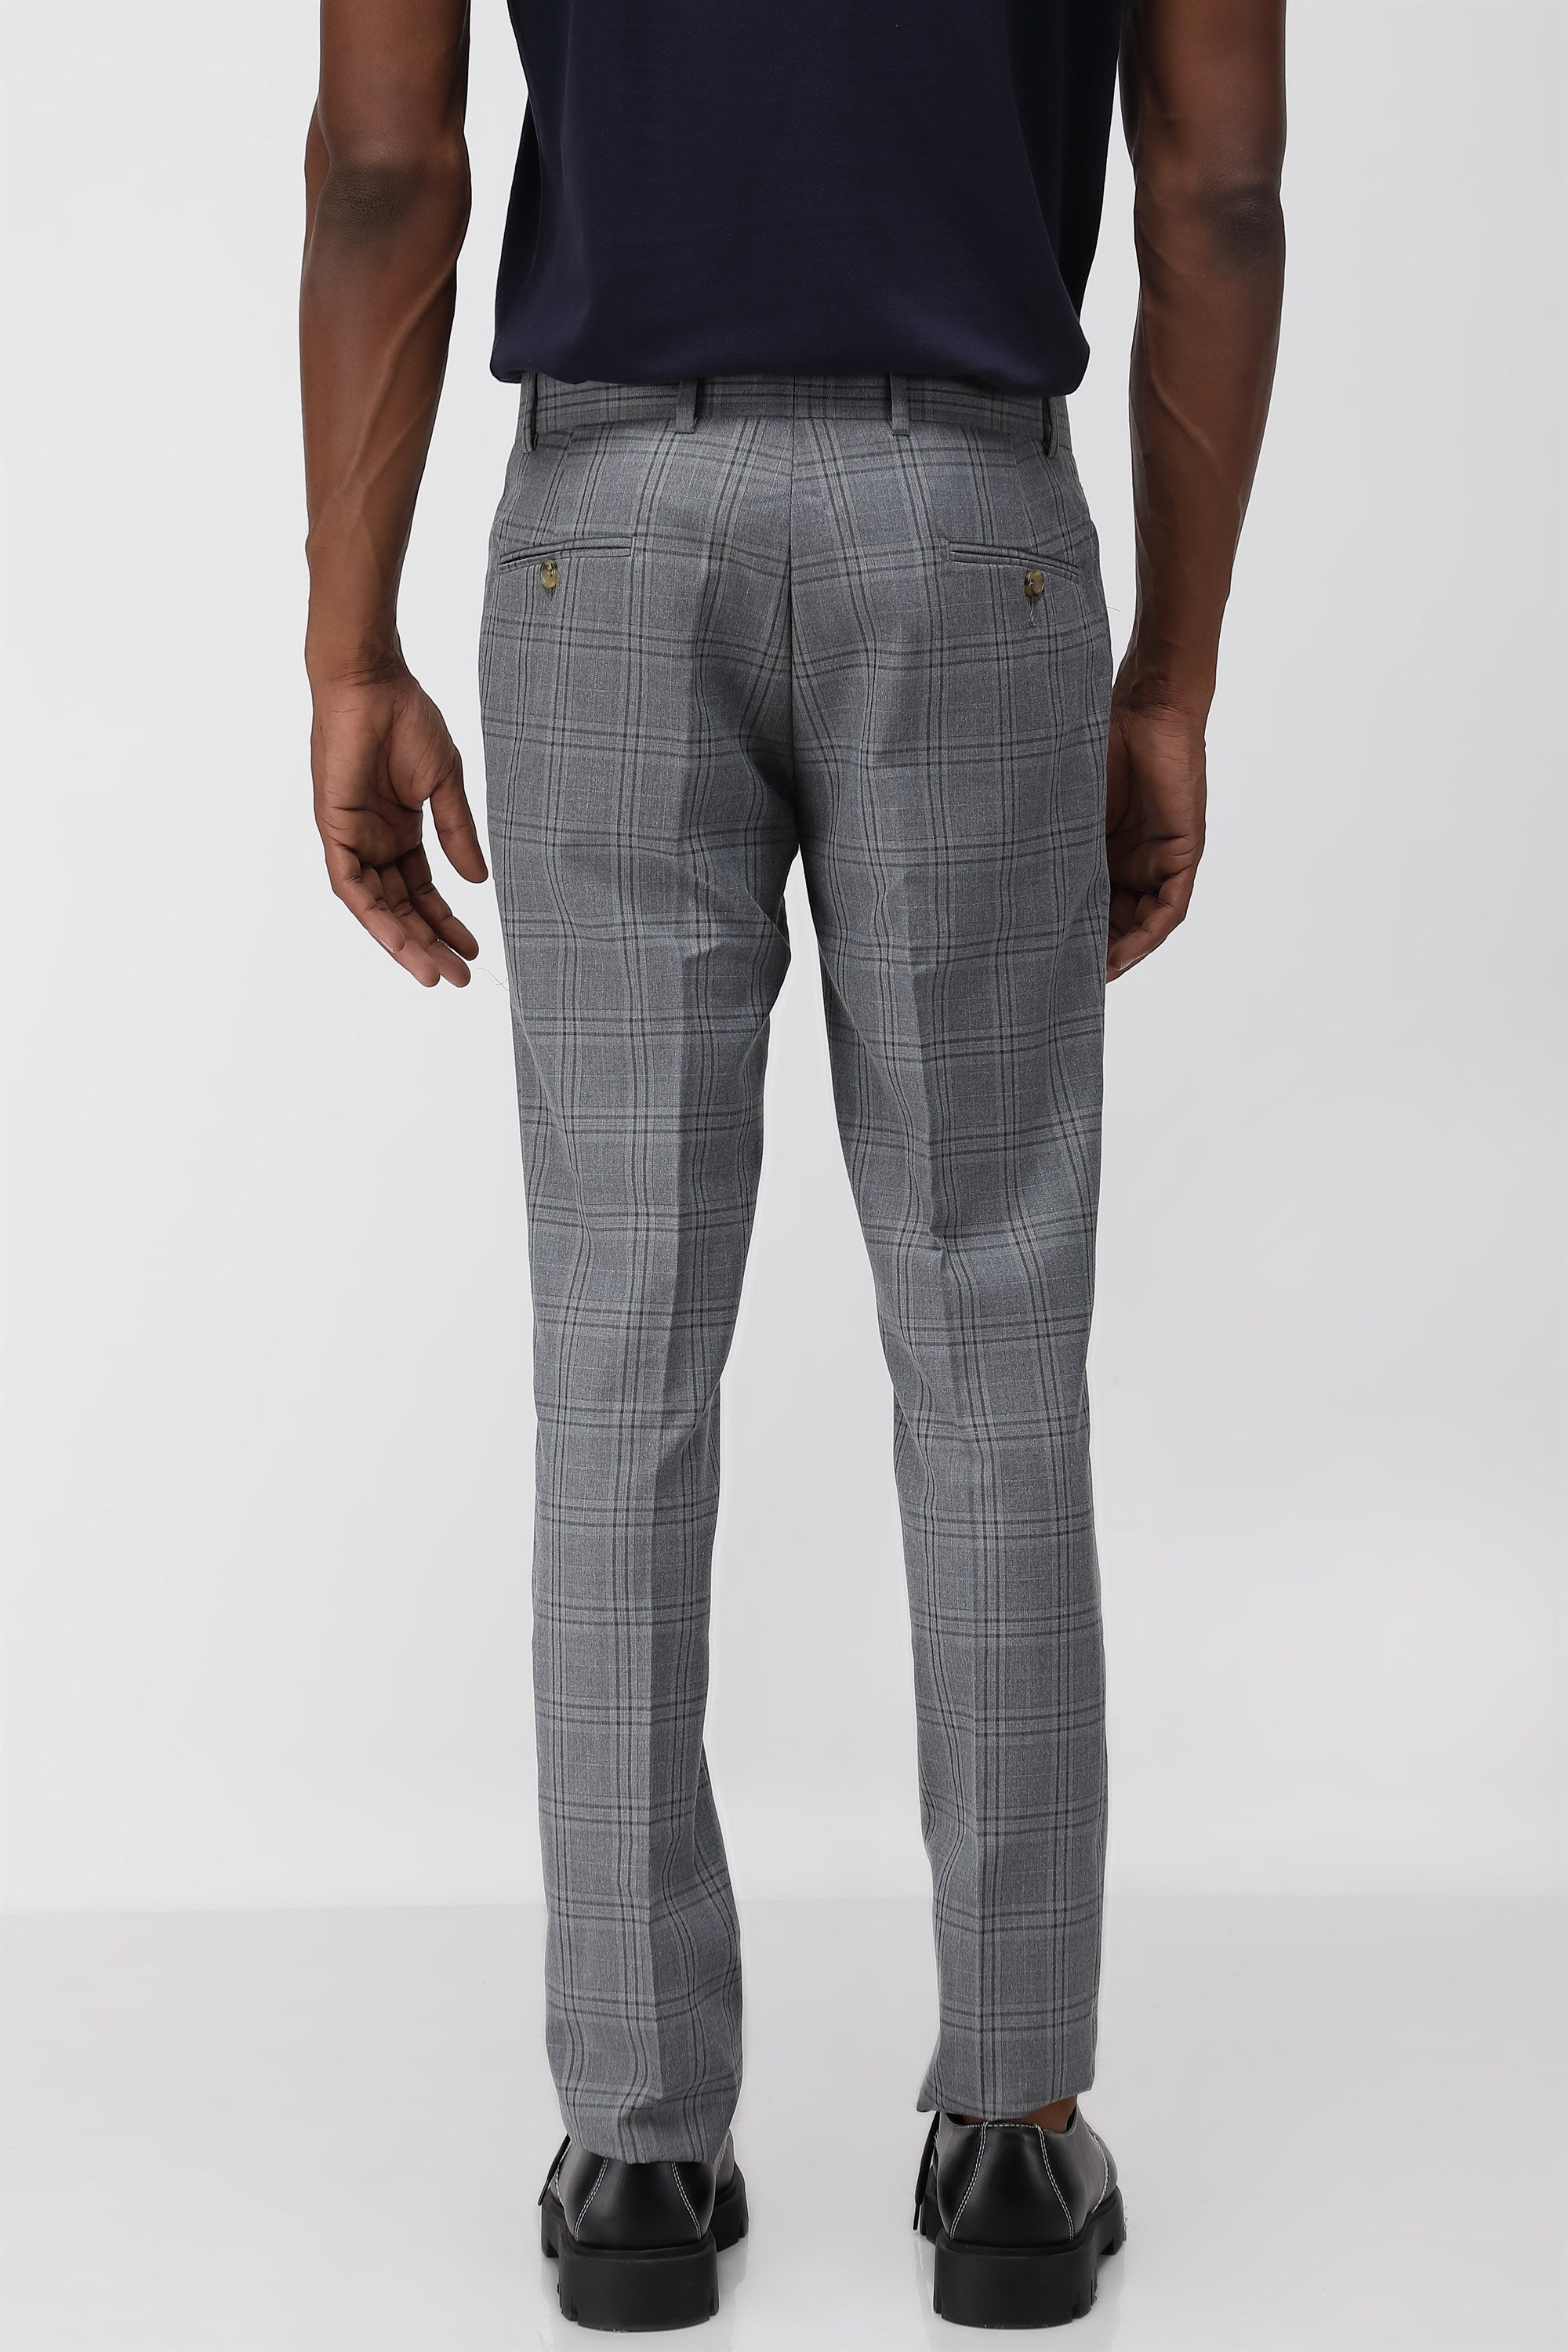 T the brand Formal Check Trouser - Grey